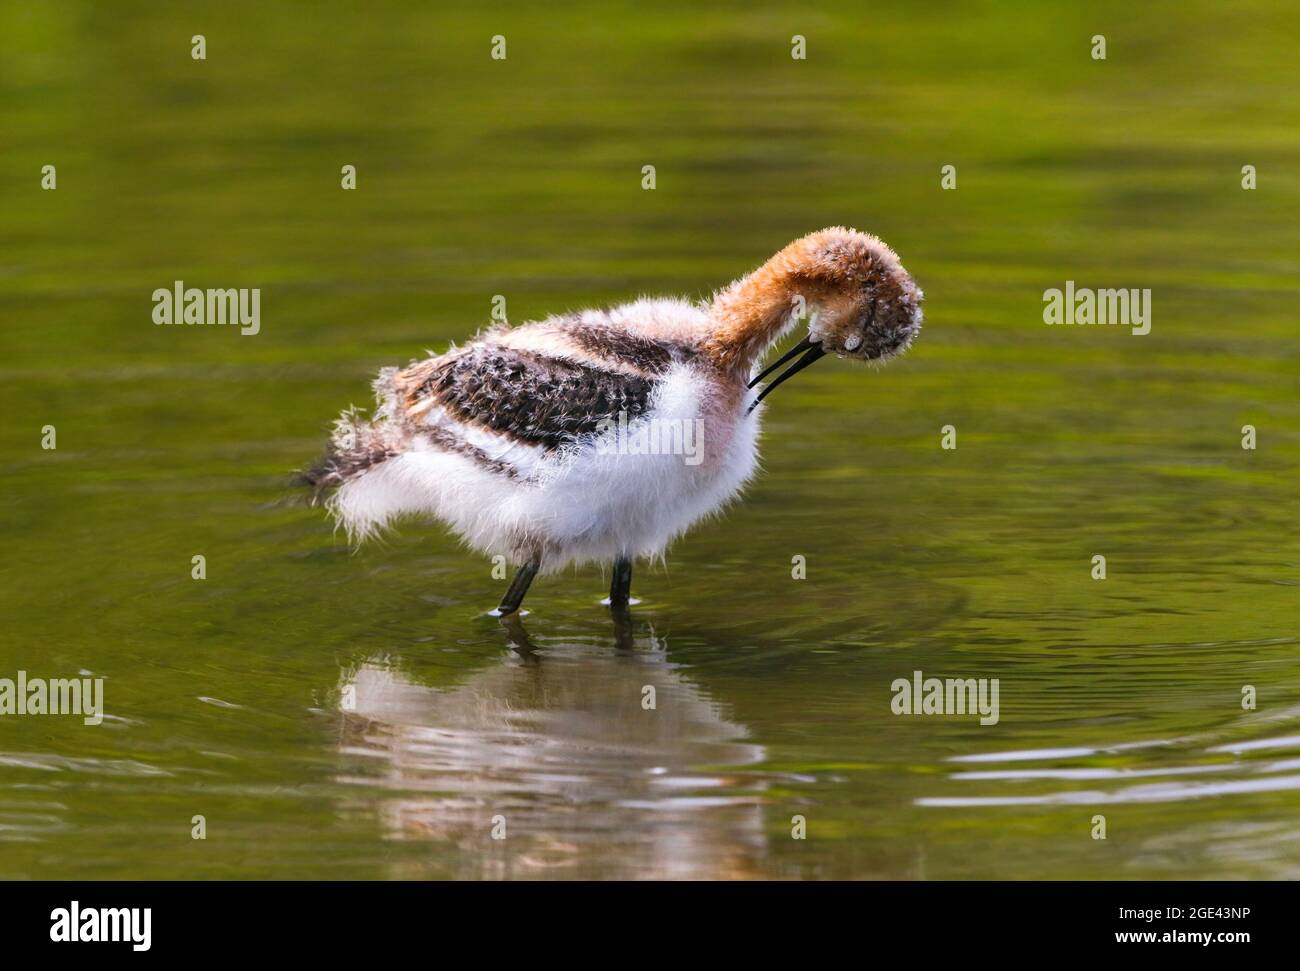 An American Avocet chick grooming its soft, downy feathers while wading in a green pond. Stock Photo